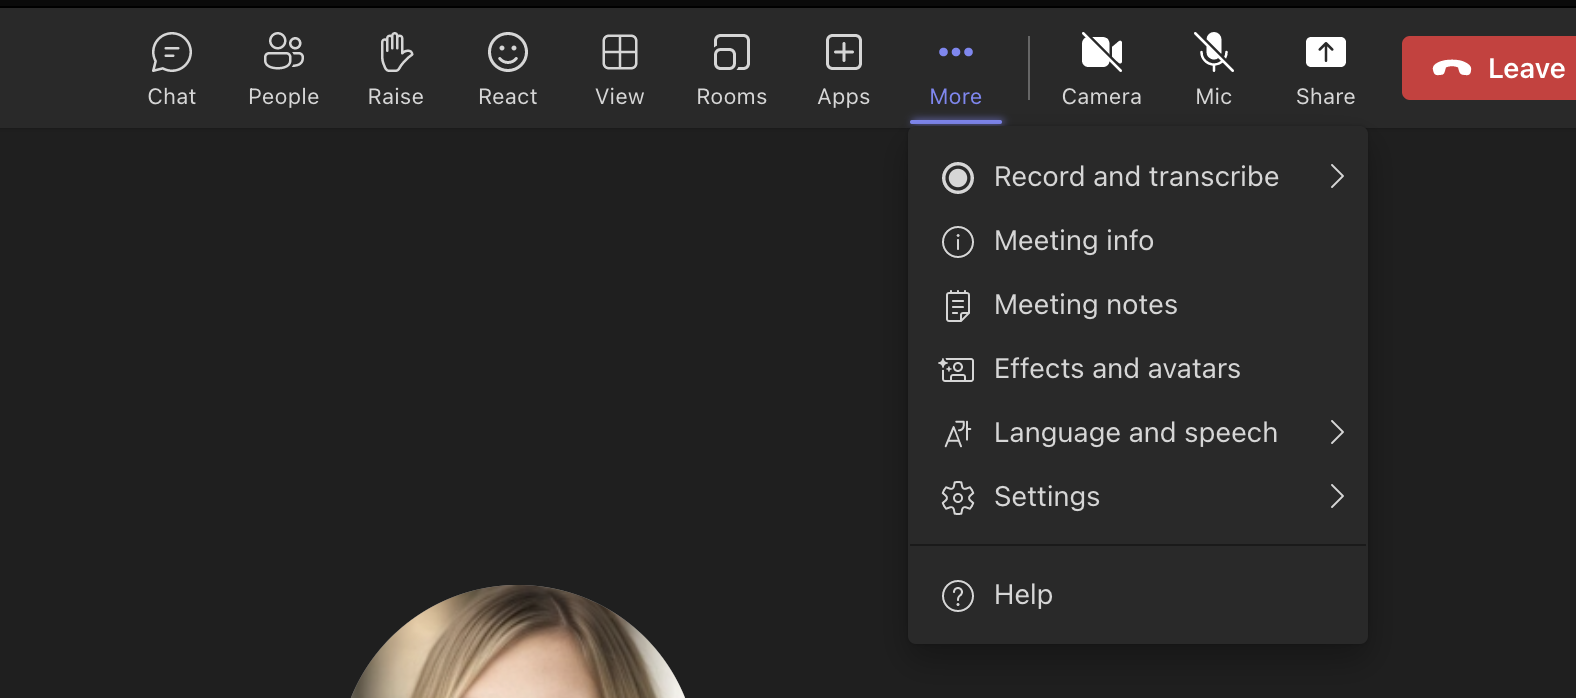 Picture of Microsoft Teams meeting screenshot showing how to create Avatars using "effects and avatars" feature